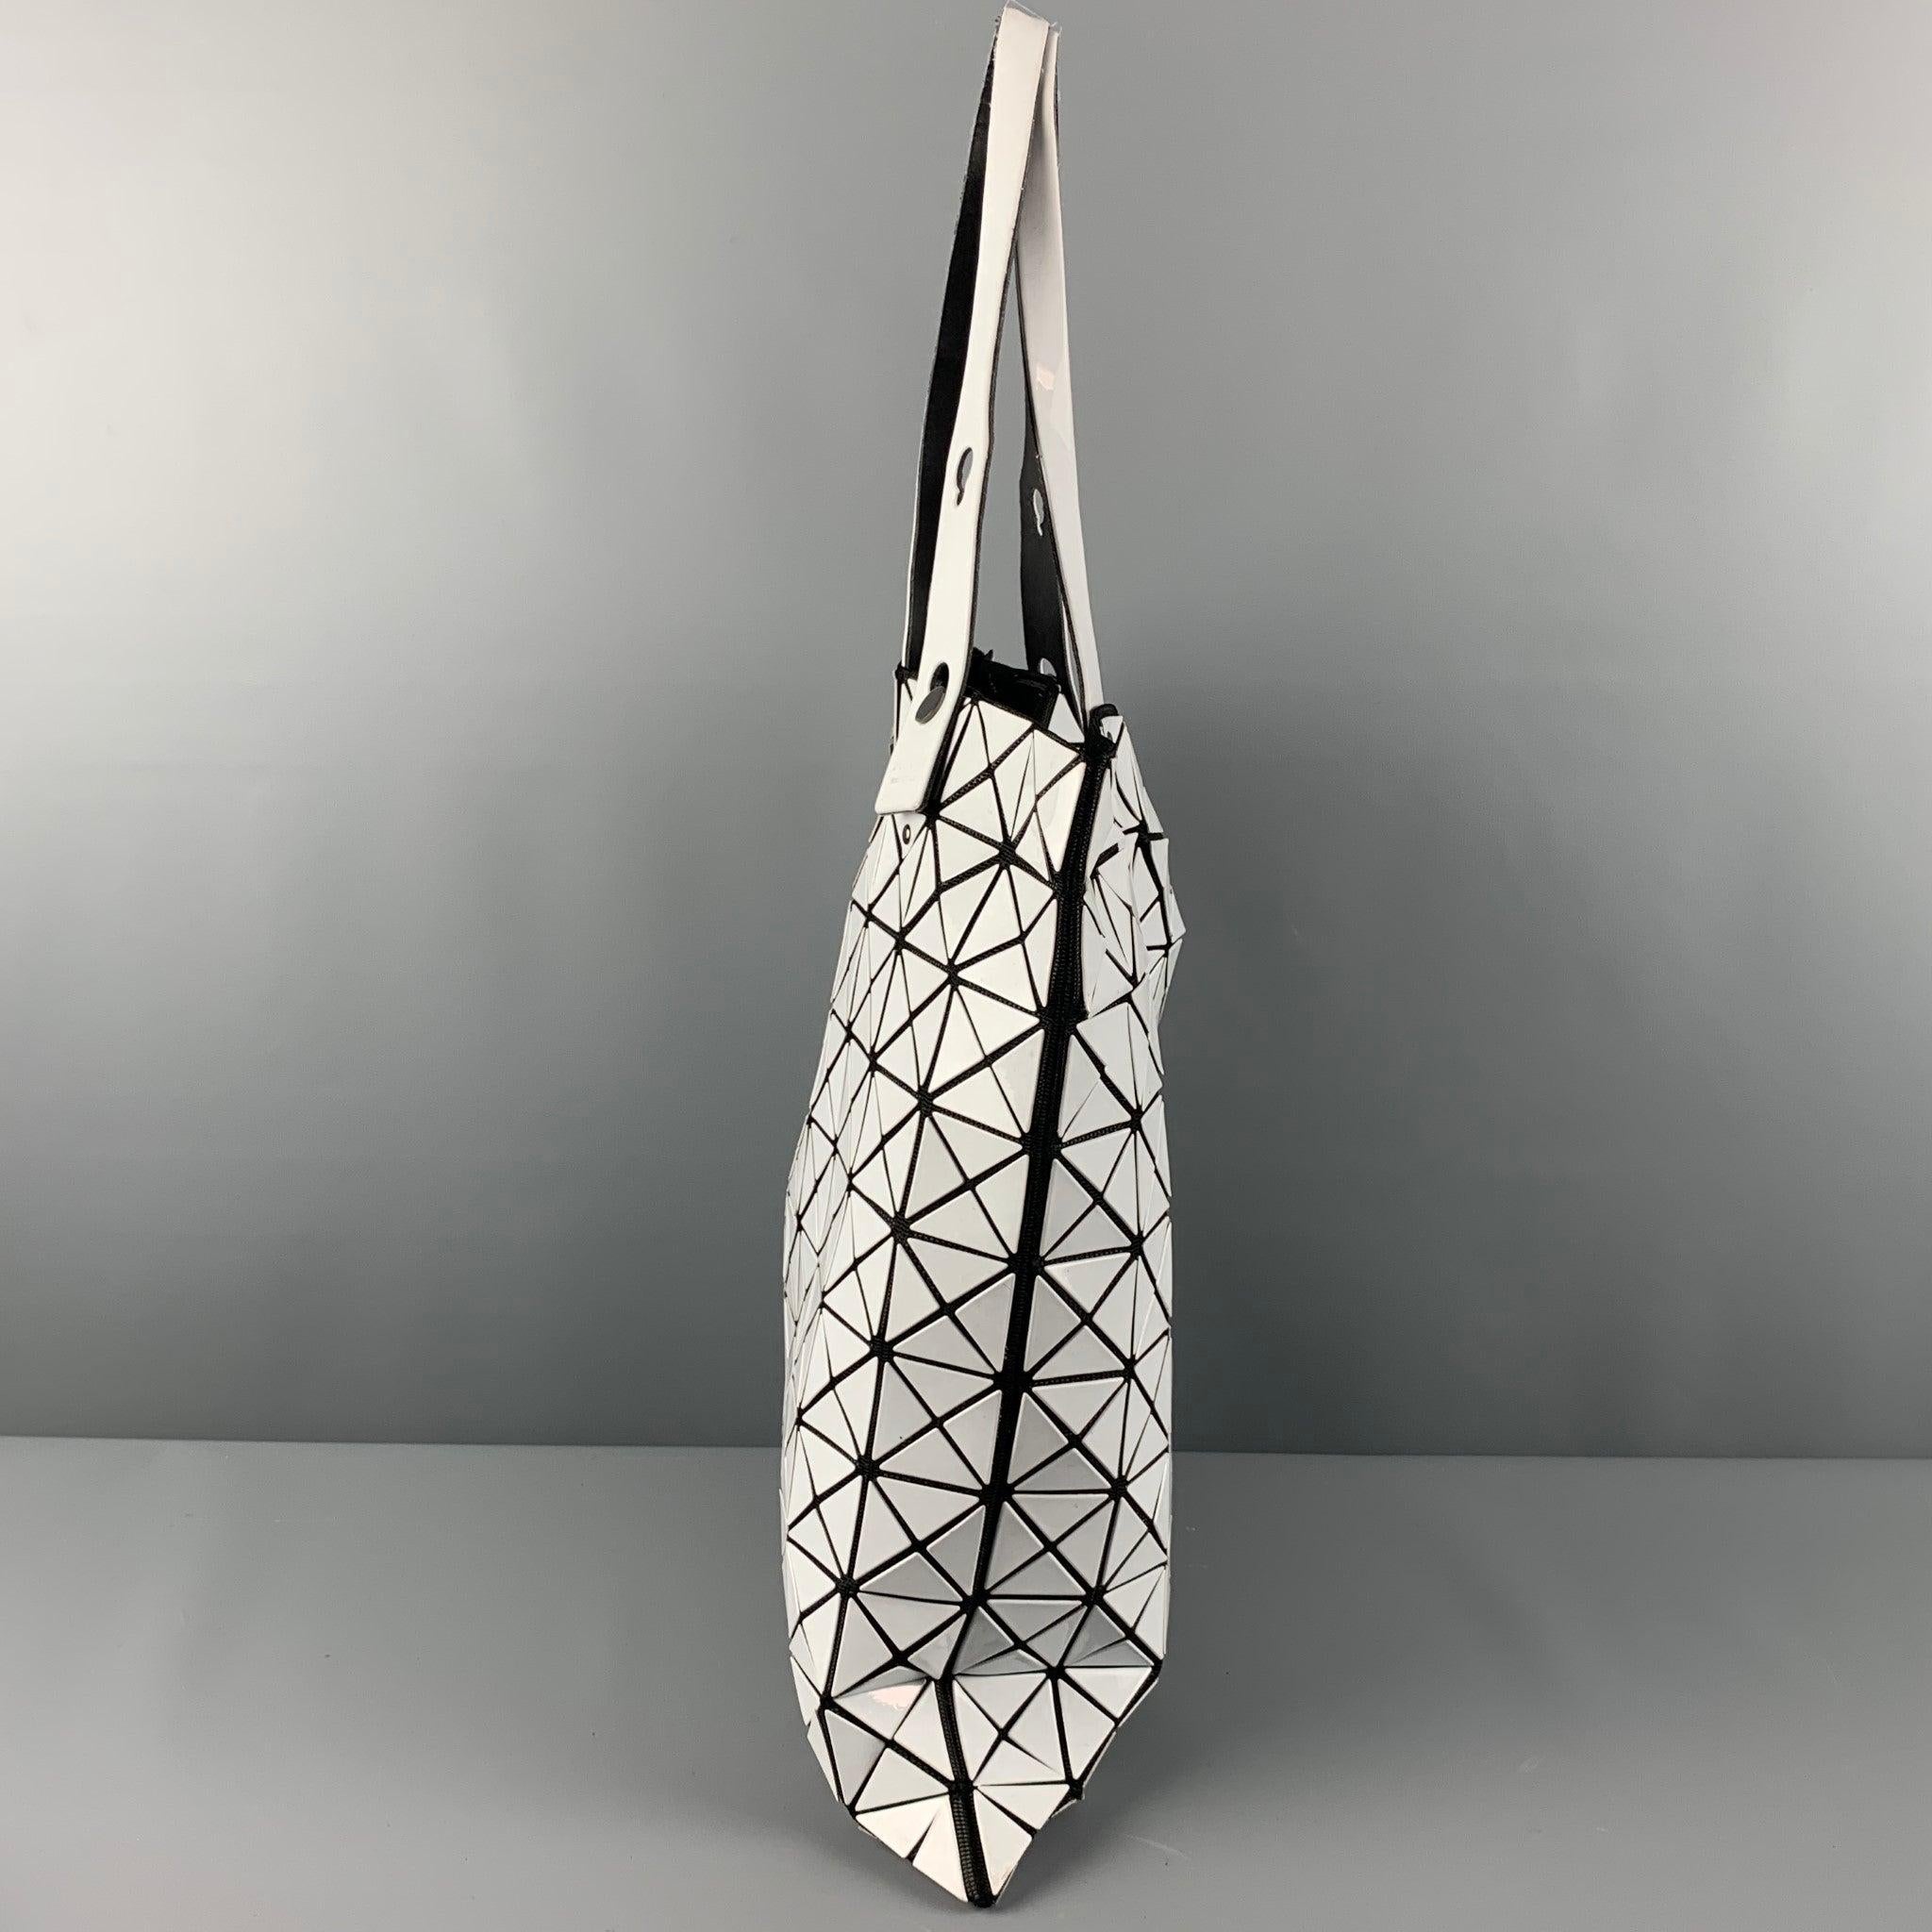 ISSEY MIYAKE White Black Triangle PVC Tote Handbag & Leather Goods In Good Condition For Sale In San Francisco, CA